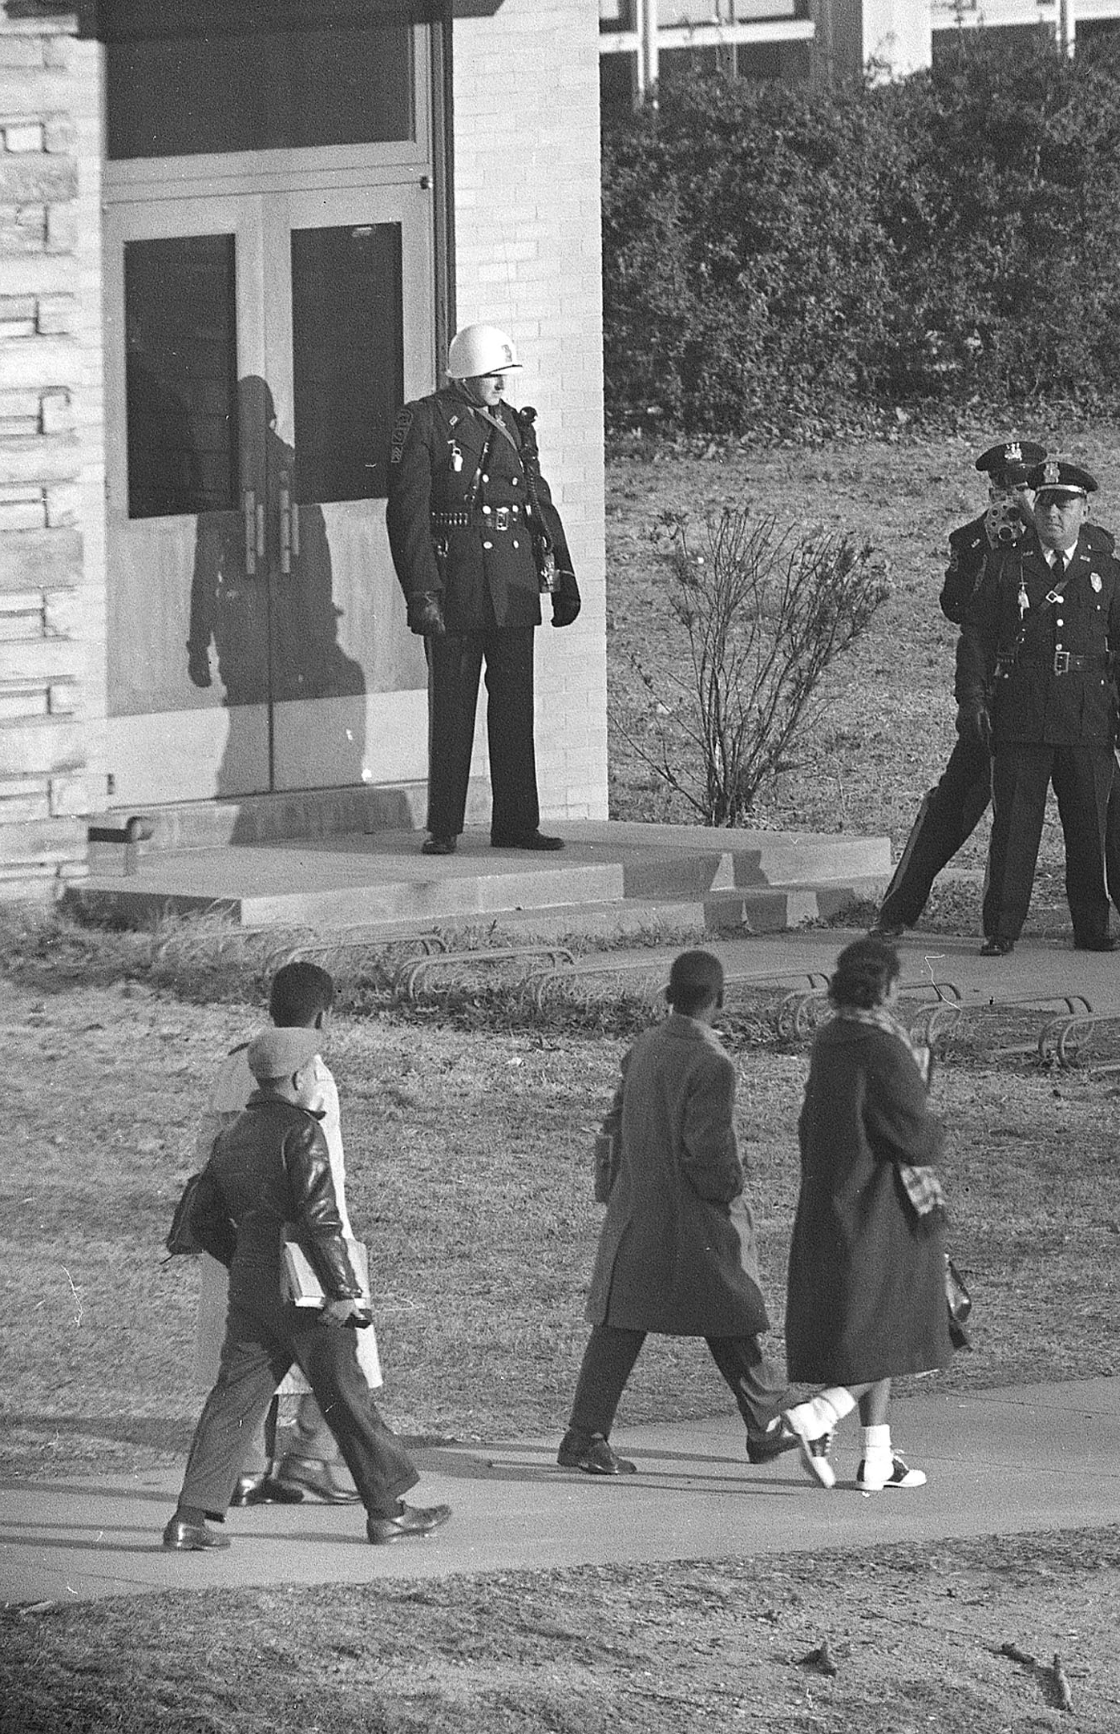 Three police officers stand at the entrance to Stratford Jr. High School as the four black students enrolled in the previously all-white school arrive for classes in Arlington, Va., on Feb. 3, 1959. One of the officers records the scene with a movie camera. Approaching the entrance are, left to right, Lance Newman, 13, Ronald Deskins, 12, Michael Jones, 12, and Gloria Thompson, 12. (AP Photo)